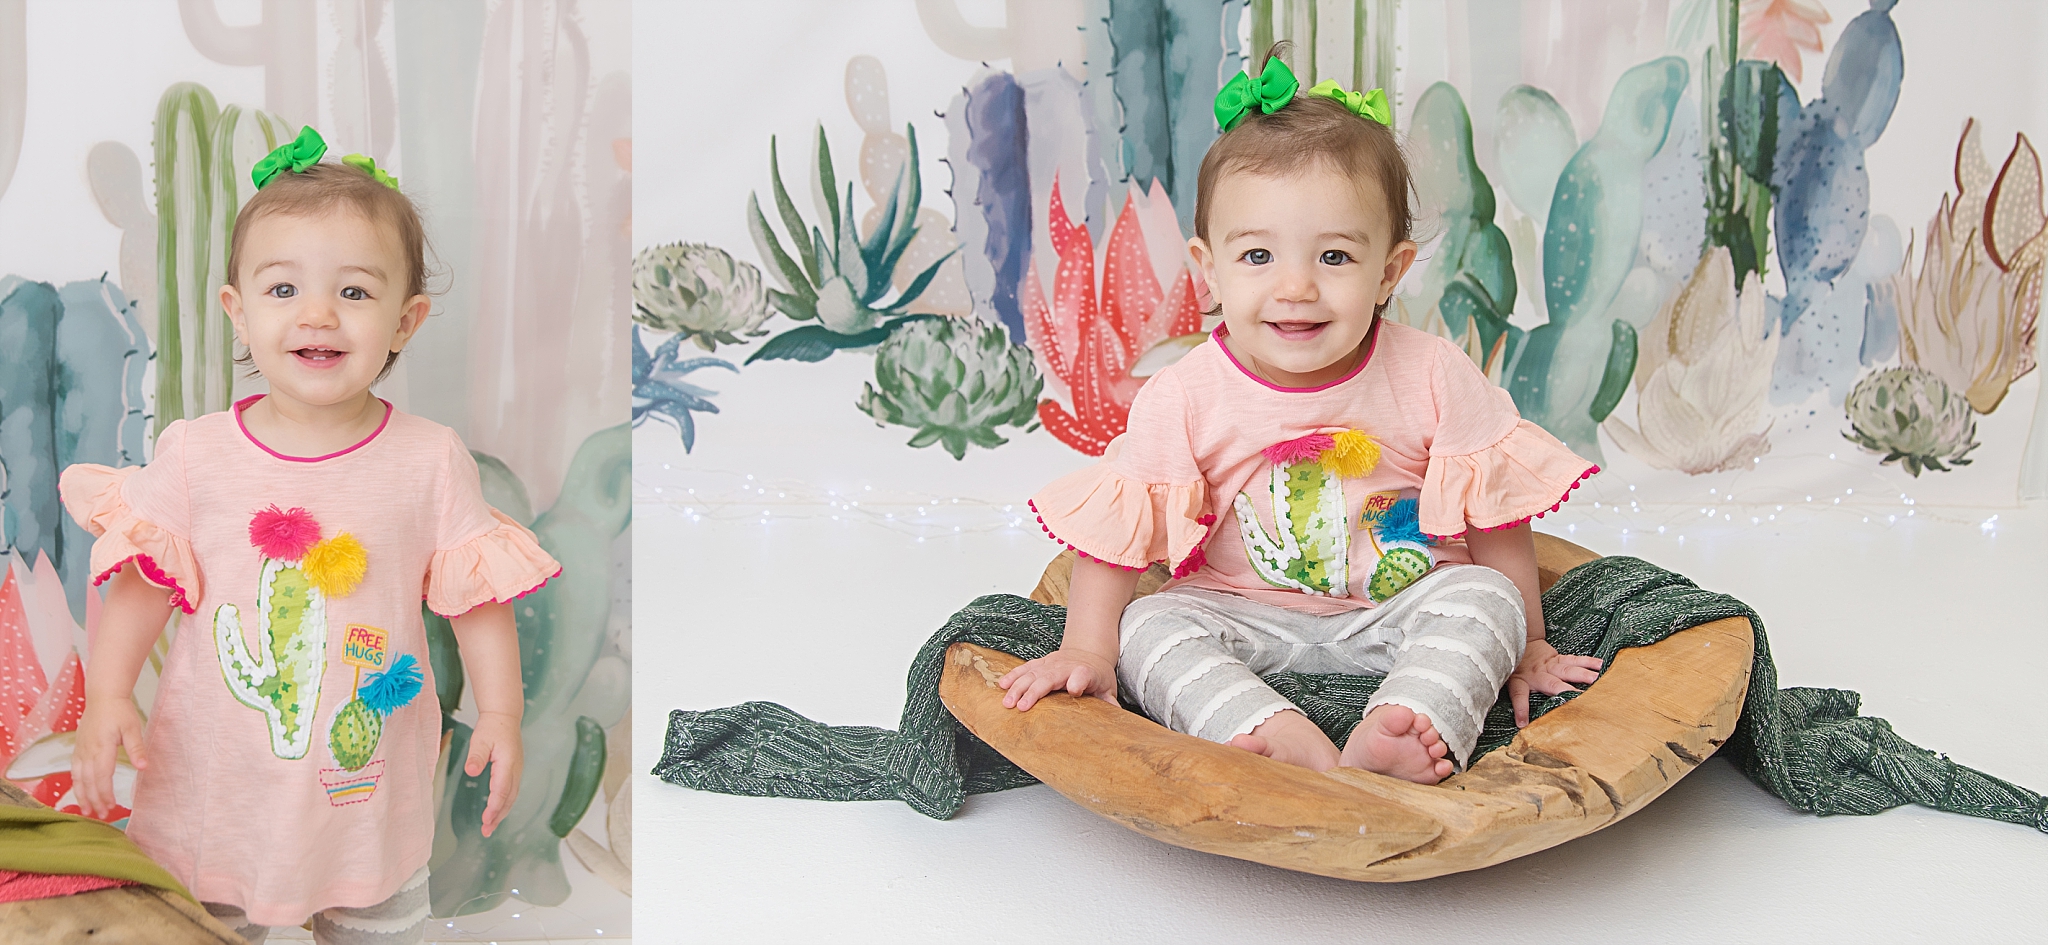 st-louis-first-birthday-cake-smash-photographer-one-year-girl-with-cactus-backdrop-and-outfit.jpg